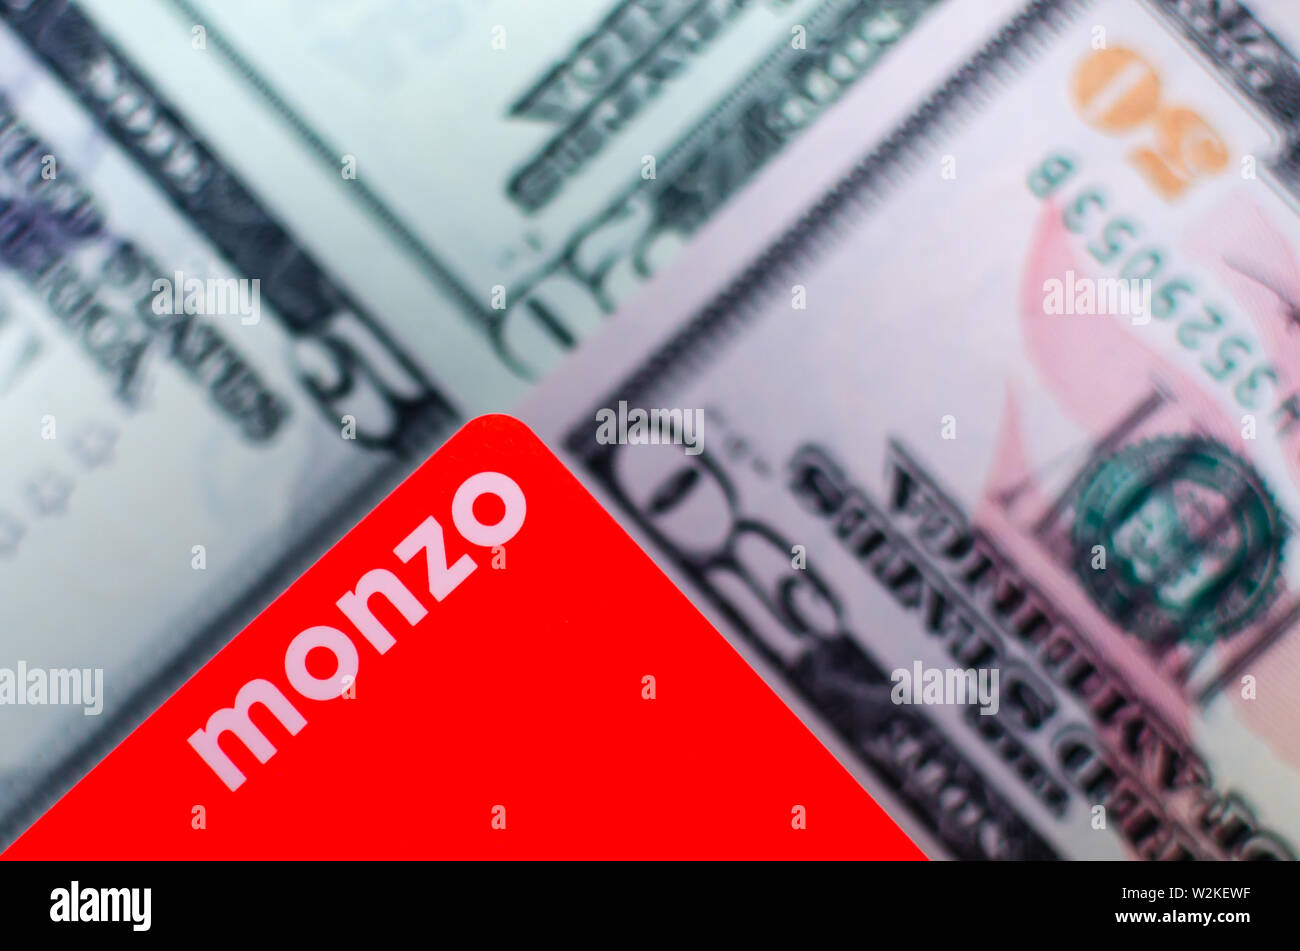 Monzo Bank cards on a blurred background of dollar bills different denominations. Stock Photo